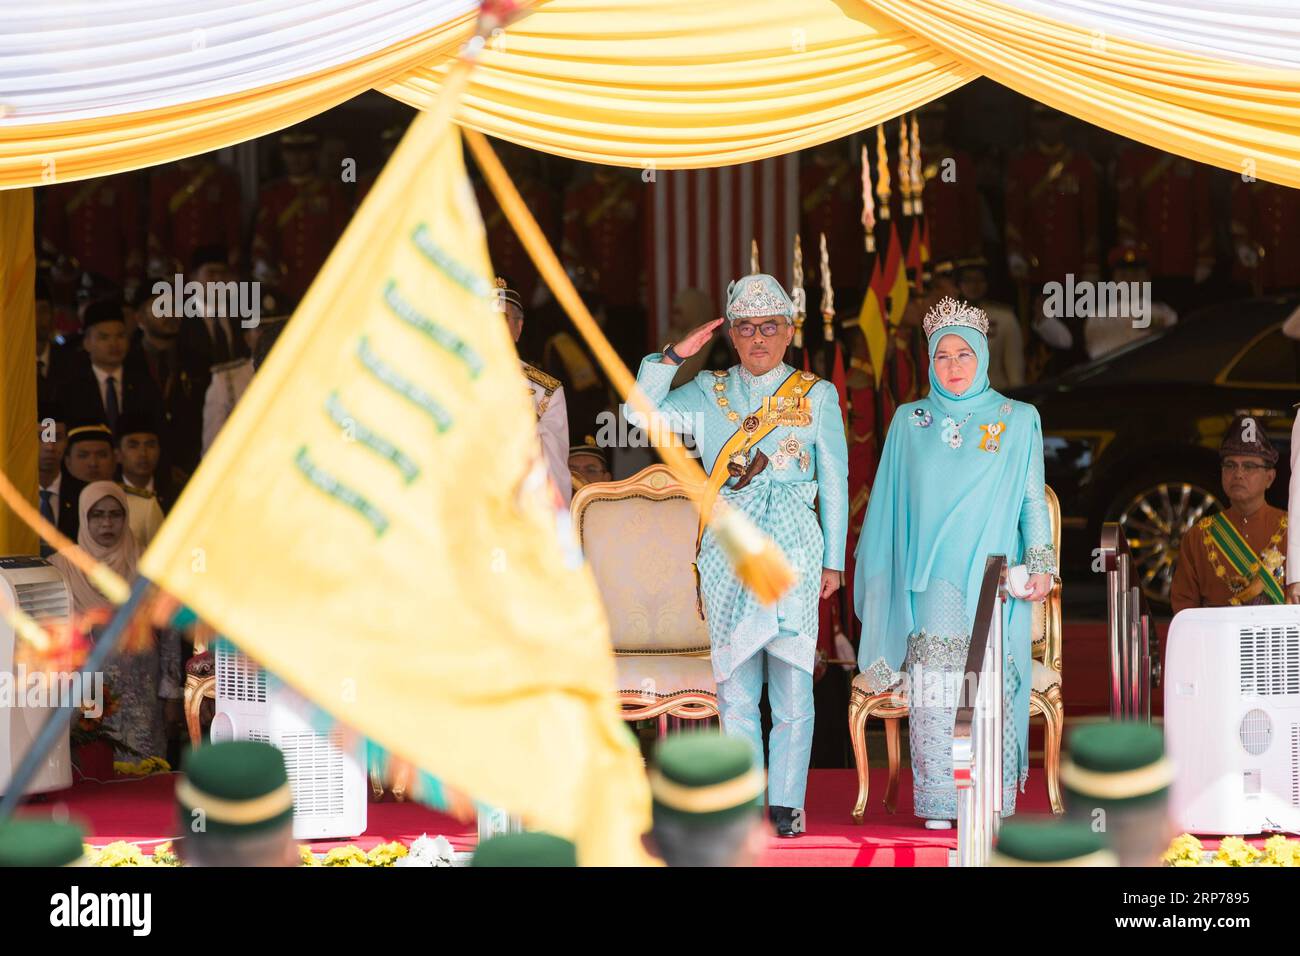 (190131) -- KUALA LUMPUR, Jan. 31, 2019 (Xinhua) -- Sultan Abdullah Sultan Ahmad Shah (L) attends the welcome ceremony at the parliament square in Kuala Lumpur, Malaysia, Jan. 31, 2019. Sultan Abdullah Sultan Ahmad Shah was sworn in as Malaysia s 16th king in a ceremony at the national palace on Thursday. Malaysia is a constitutional monarchy, with nine sultans or rulers, who head their respective state and act as the religious leader, taking turns to serve as the king for a five-year term. (Xinhua/Zhu Wei) MAYLASIA-KUALA LUMPUR-NEW KING PUBLICATIONxNOTxINxCHN Stock Photo